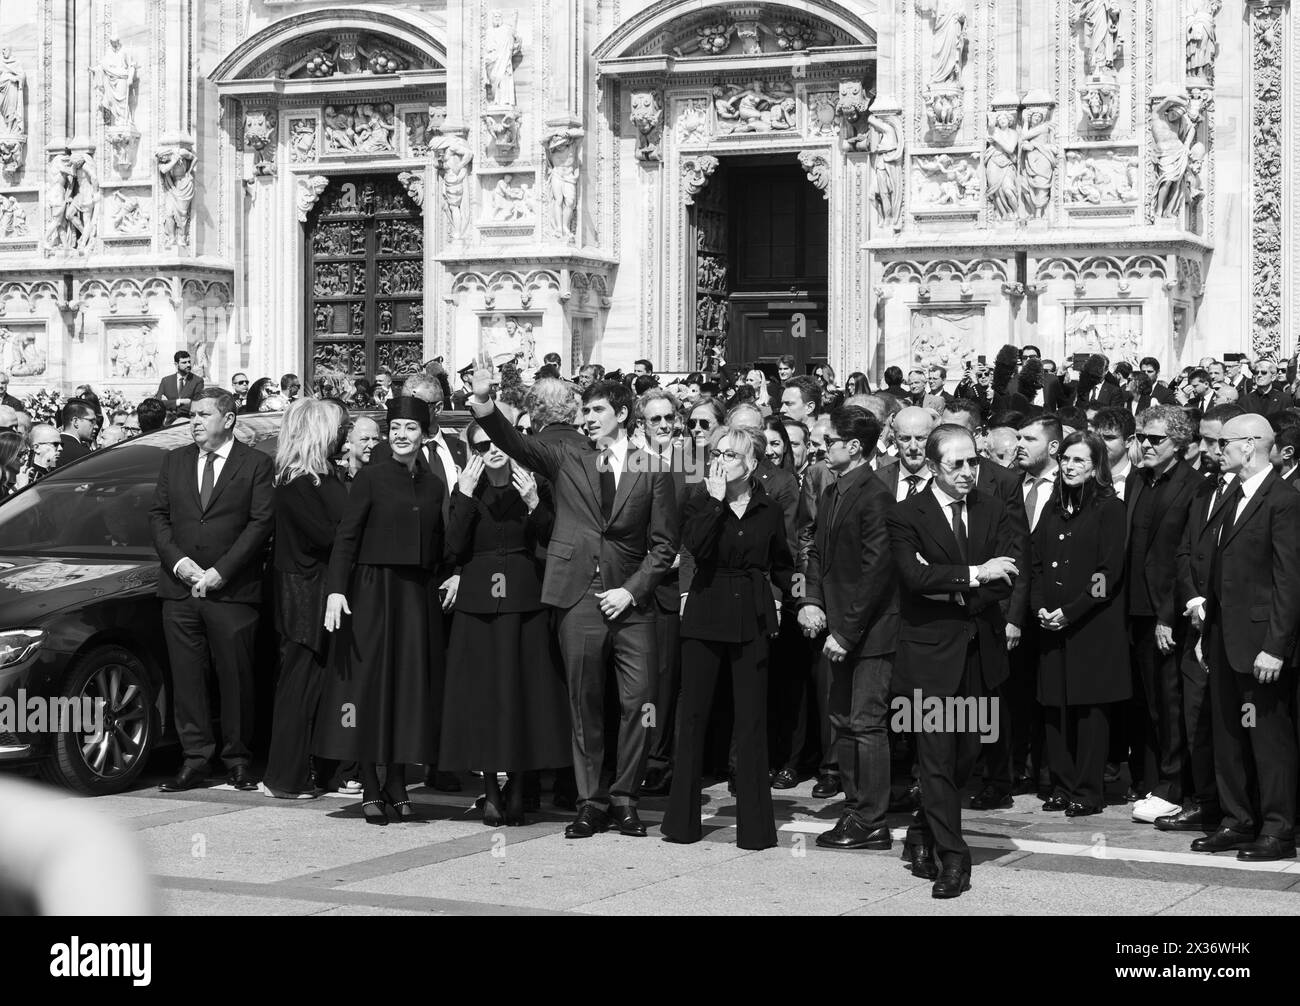 Milano, Italia, 14 Giugno, 2023. The Berlusconi family greet the audience and supporter of Forza Italia at the State Funeral of former Italian Prime Minister Silvio Berlusconi, held at the Milan Cathedral. From left in the group: the two daughters of the Ex Premier Silvio Berlusconi Eleonora and Barbara, his last son Luigi, the first daughter Marina, the first son Pier Silvio Berlusconi with Silvio Berlusconi's brother Paolo. Berlusconi died on June 12, 2023 at the San Raffaele hospital in Milan. The funeral, celebrated by Archbishop Mario Delpini, was broadcast live on giant screens set up in Stock Photo